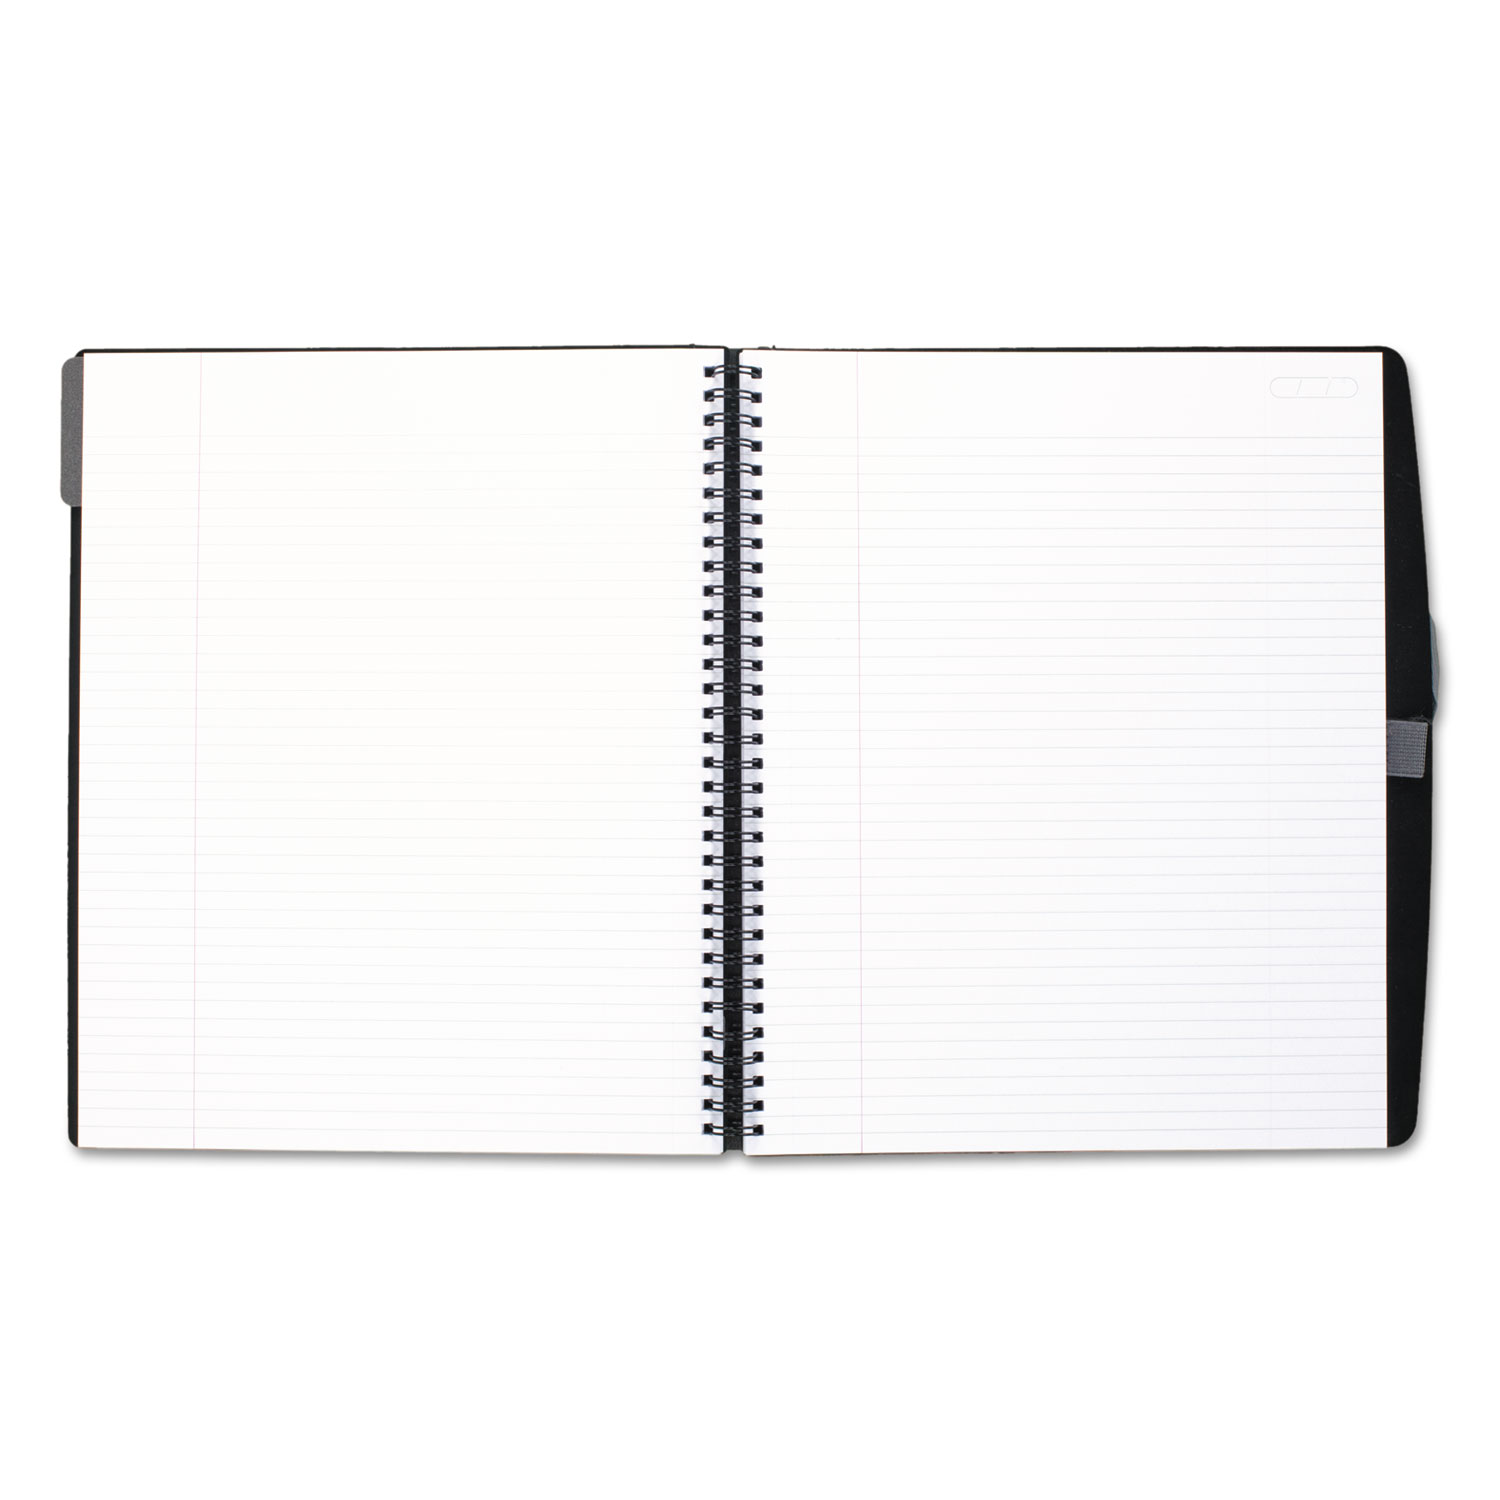 Accents Business Notebook, Legal Rule, 11 x 8 7/8, Silver Cover, 100 Sheets